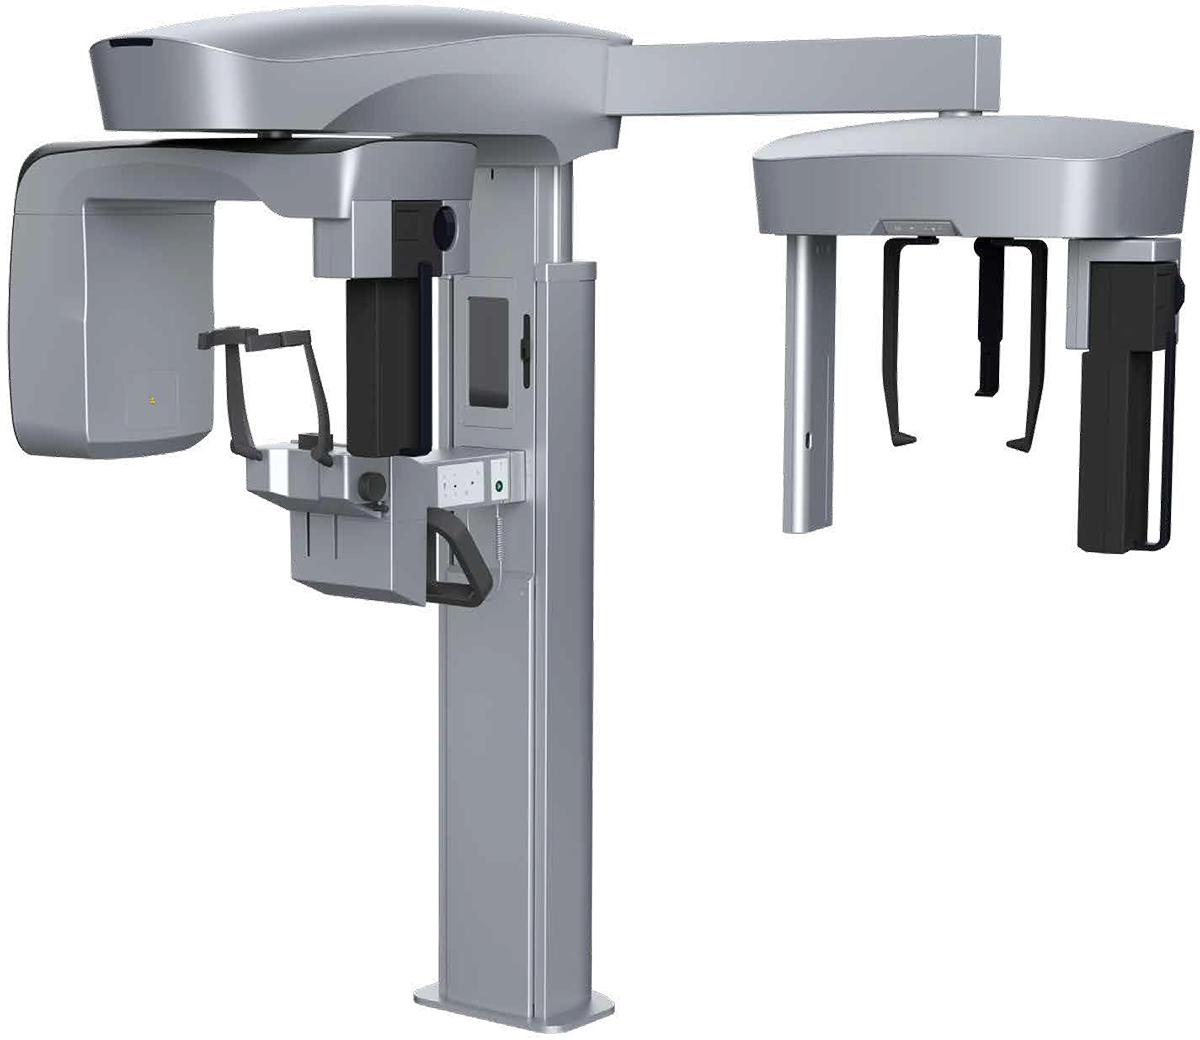 The new Evolve CBCT, PAN and CEPH model is prepared for high flow demands and is designed to provide a complete solution in a single product. Image Credit: © PreXion, Inc. 